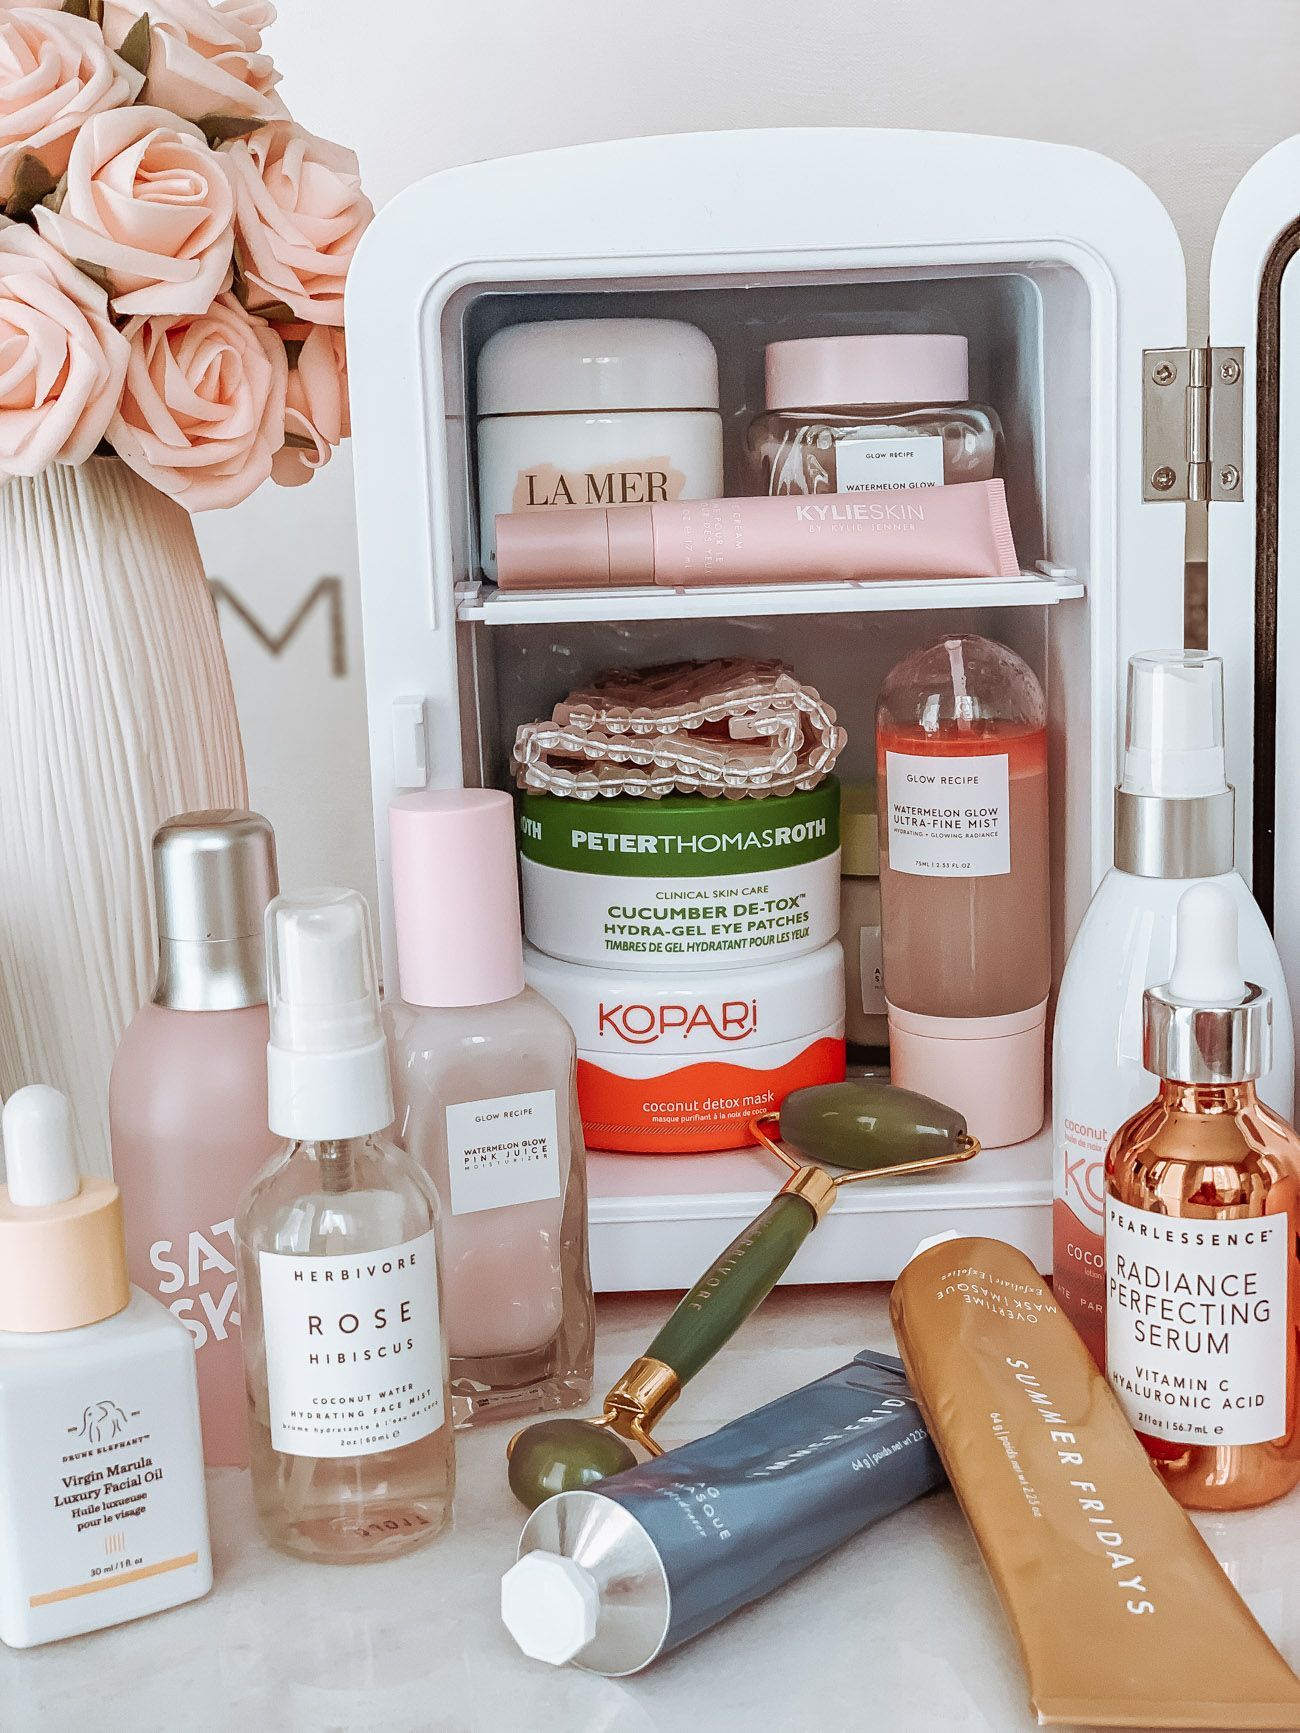 Skincare Fridge Essentials - Do You Have One Yet? - BLONDIE IN THE CITY - Skincare Fridge Essentials - Do You Have One Yet? - BLONDIE IN THE CITY -   14 beauty Care products ideas